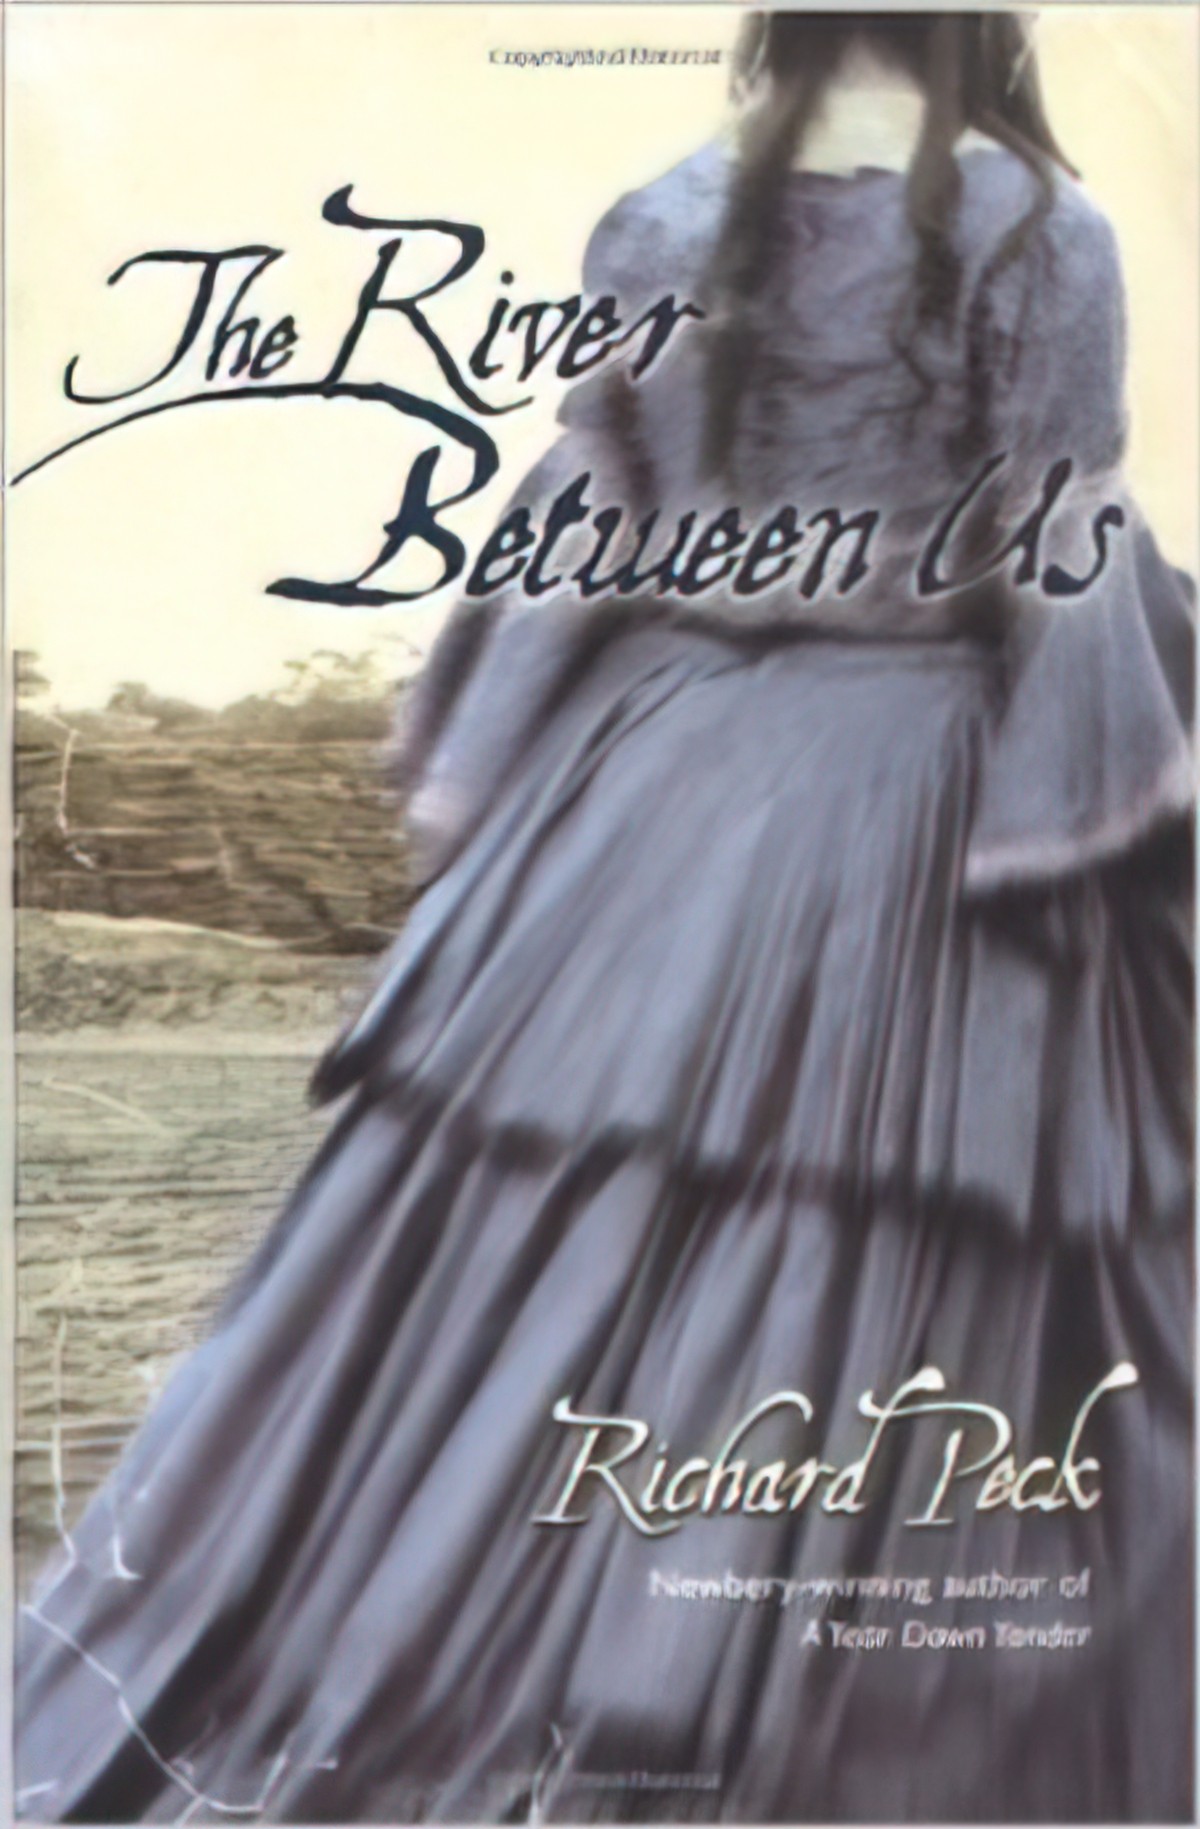 The River Between Us by Richard Peck